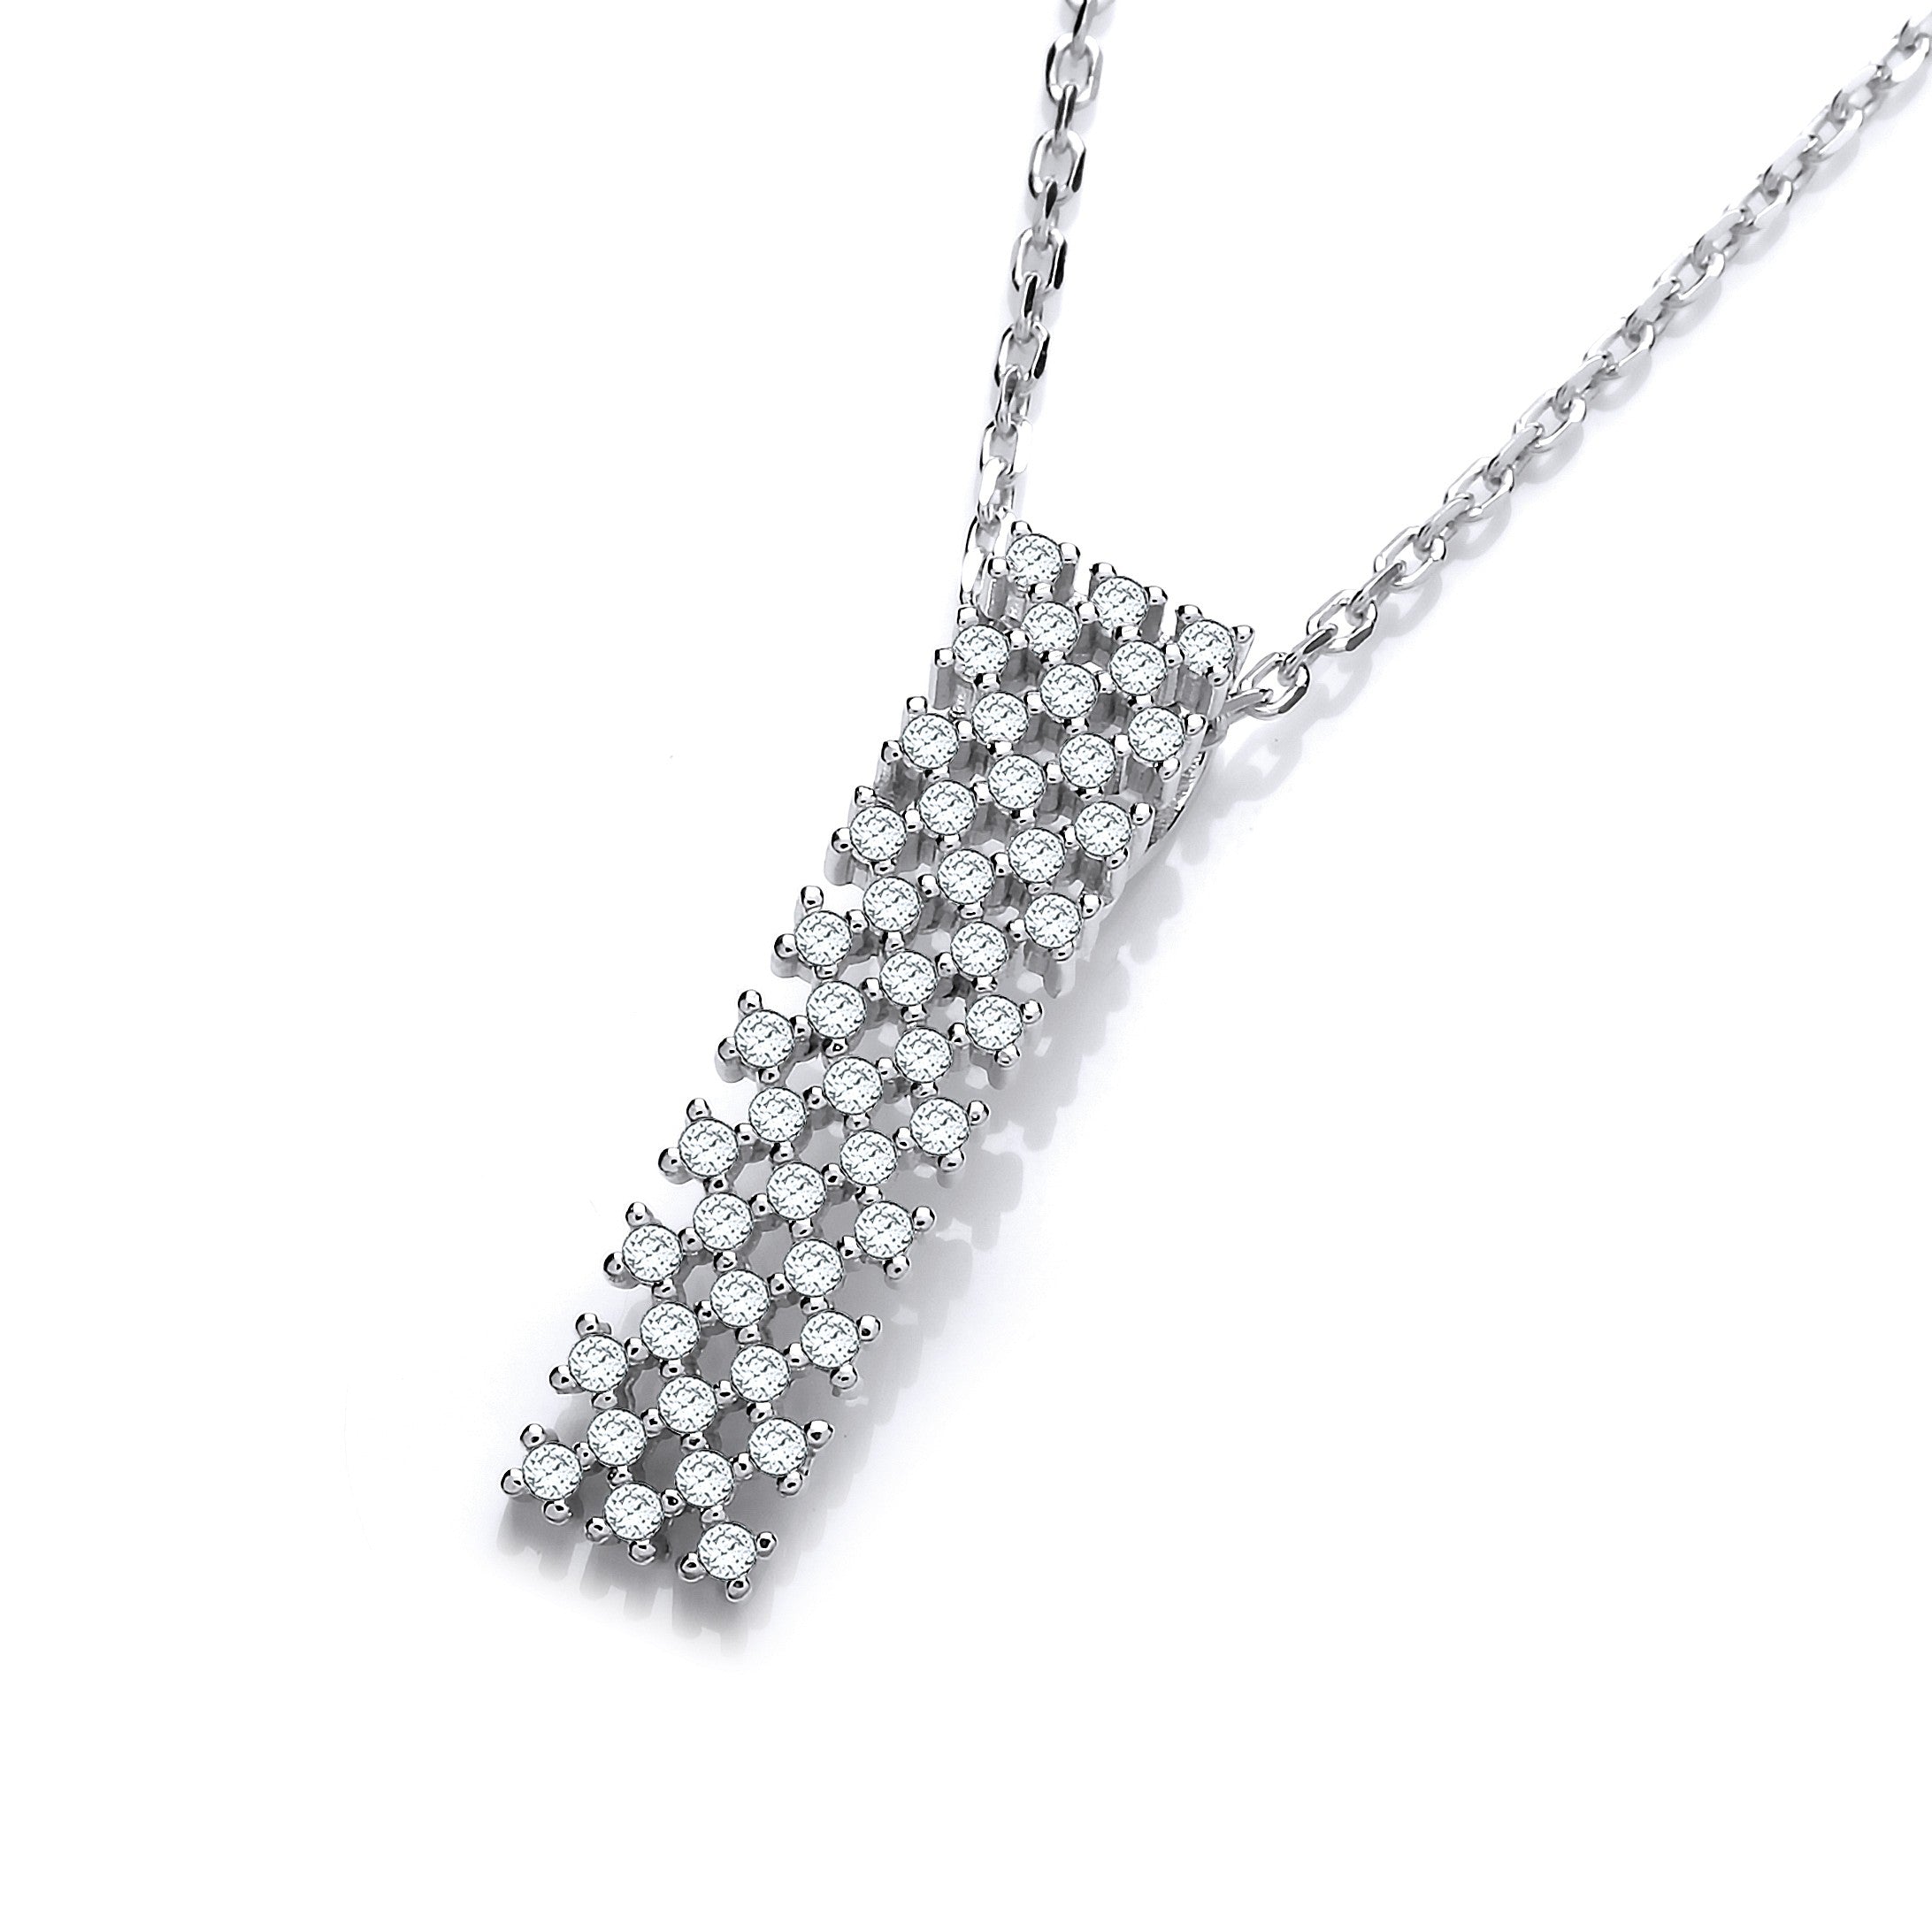 Micro Pave Multi Row Cubic Zirconia Pendant with 18" Chain